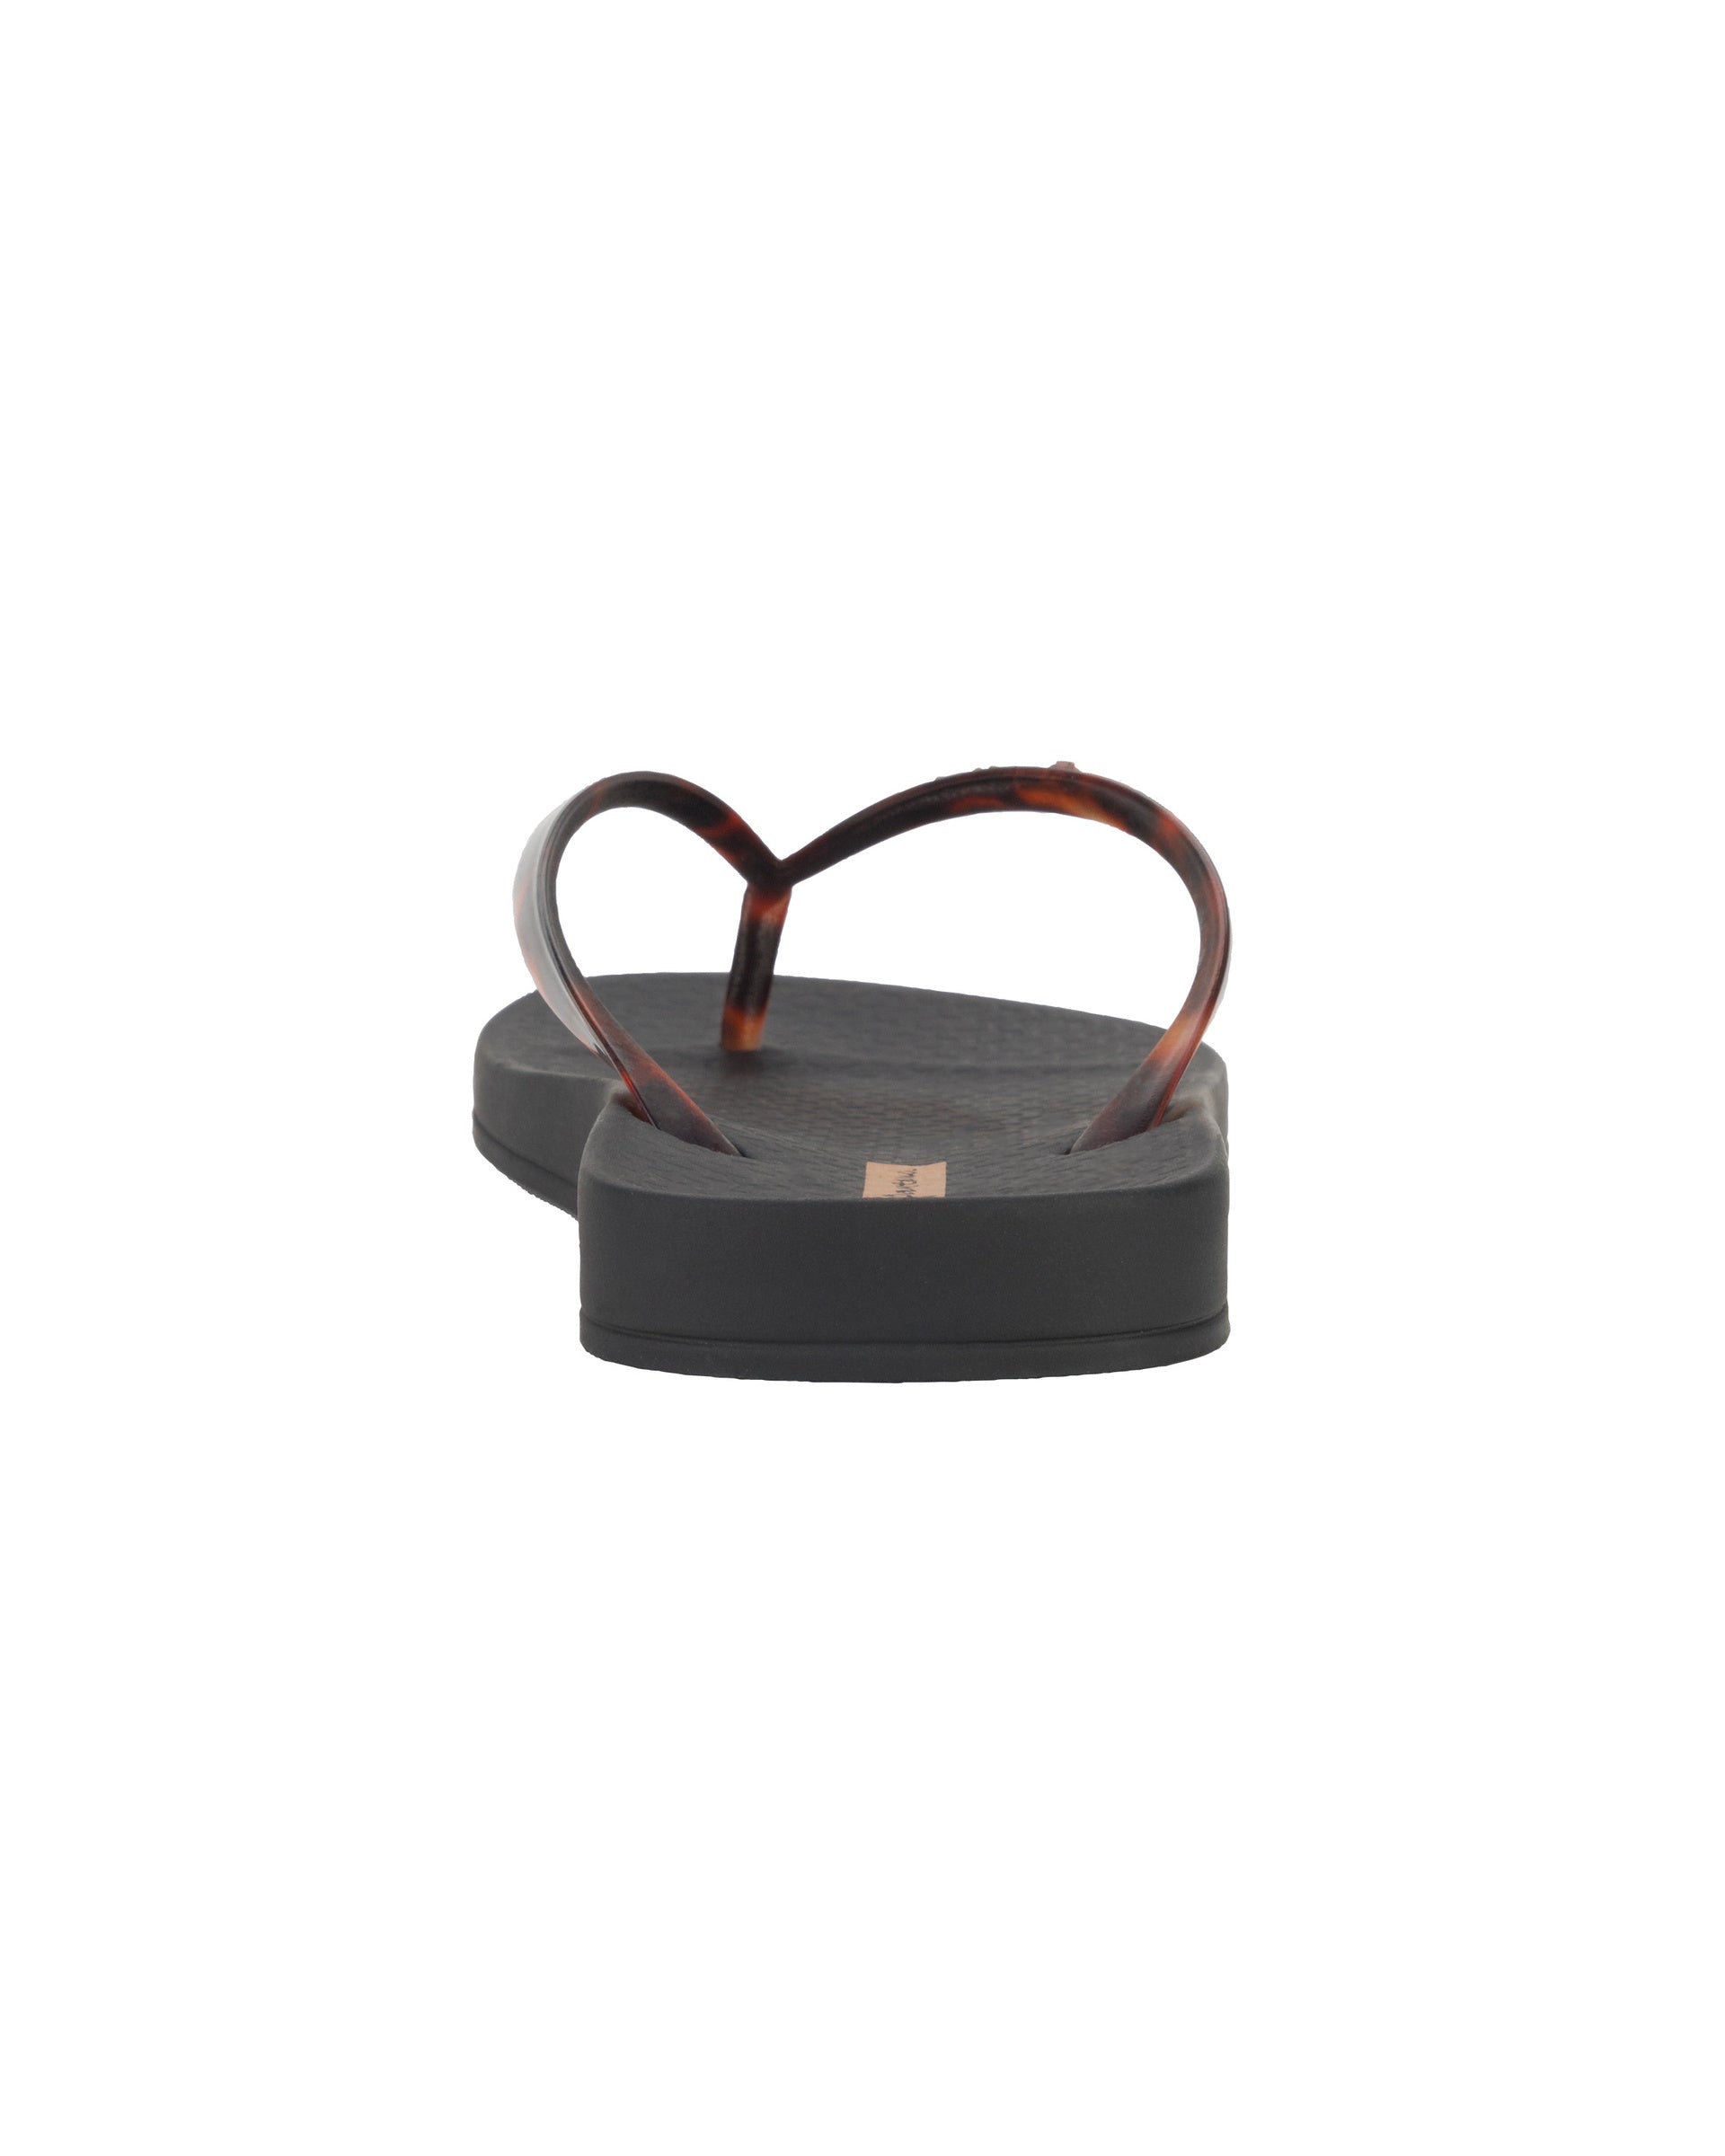 Back view of a black Ipanema Ana Connect women's flip flop with brown tortoiseshell  color strap.